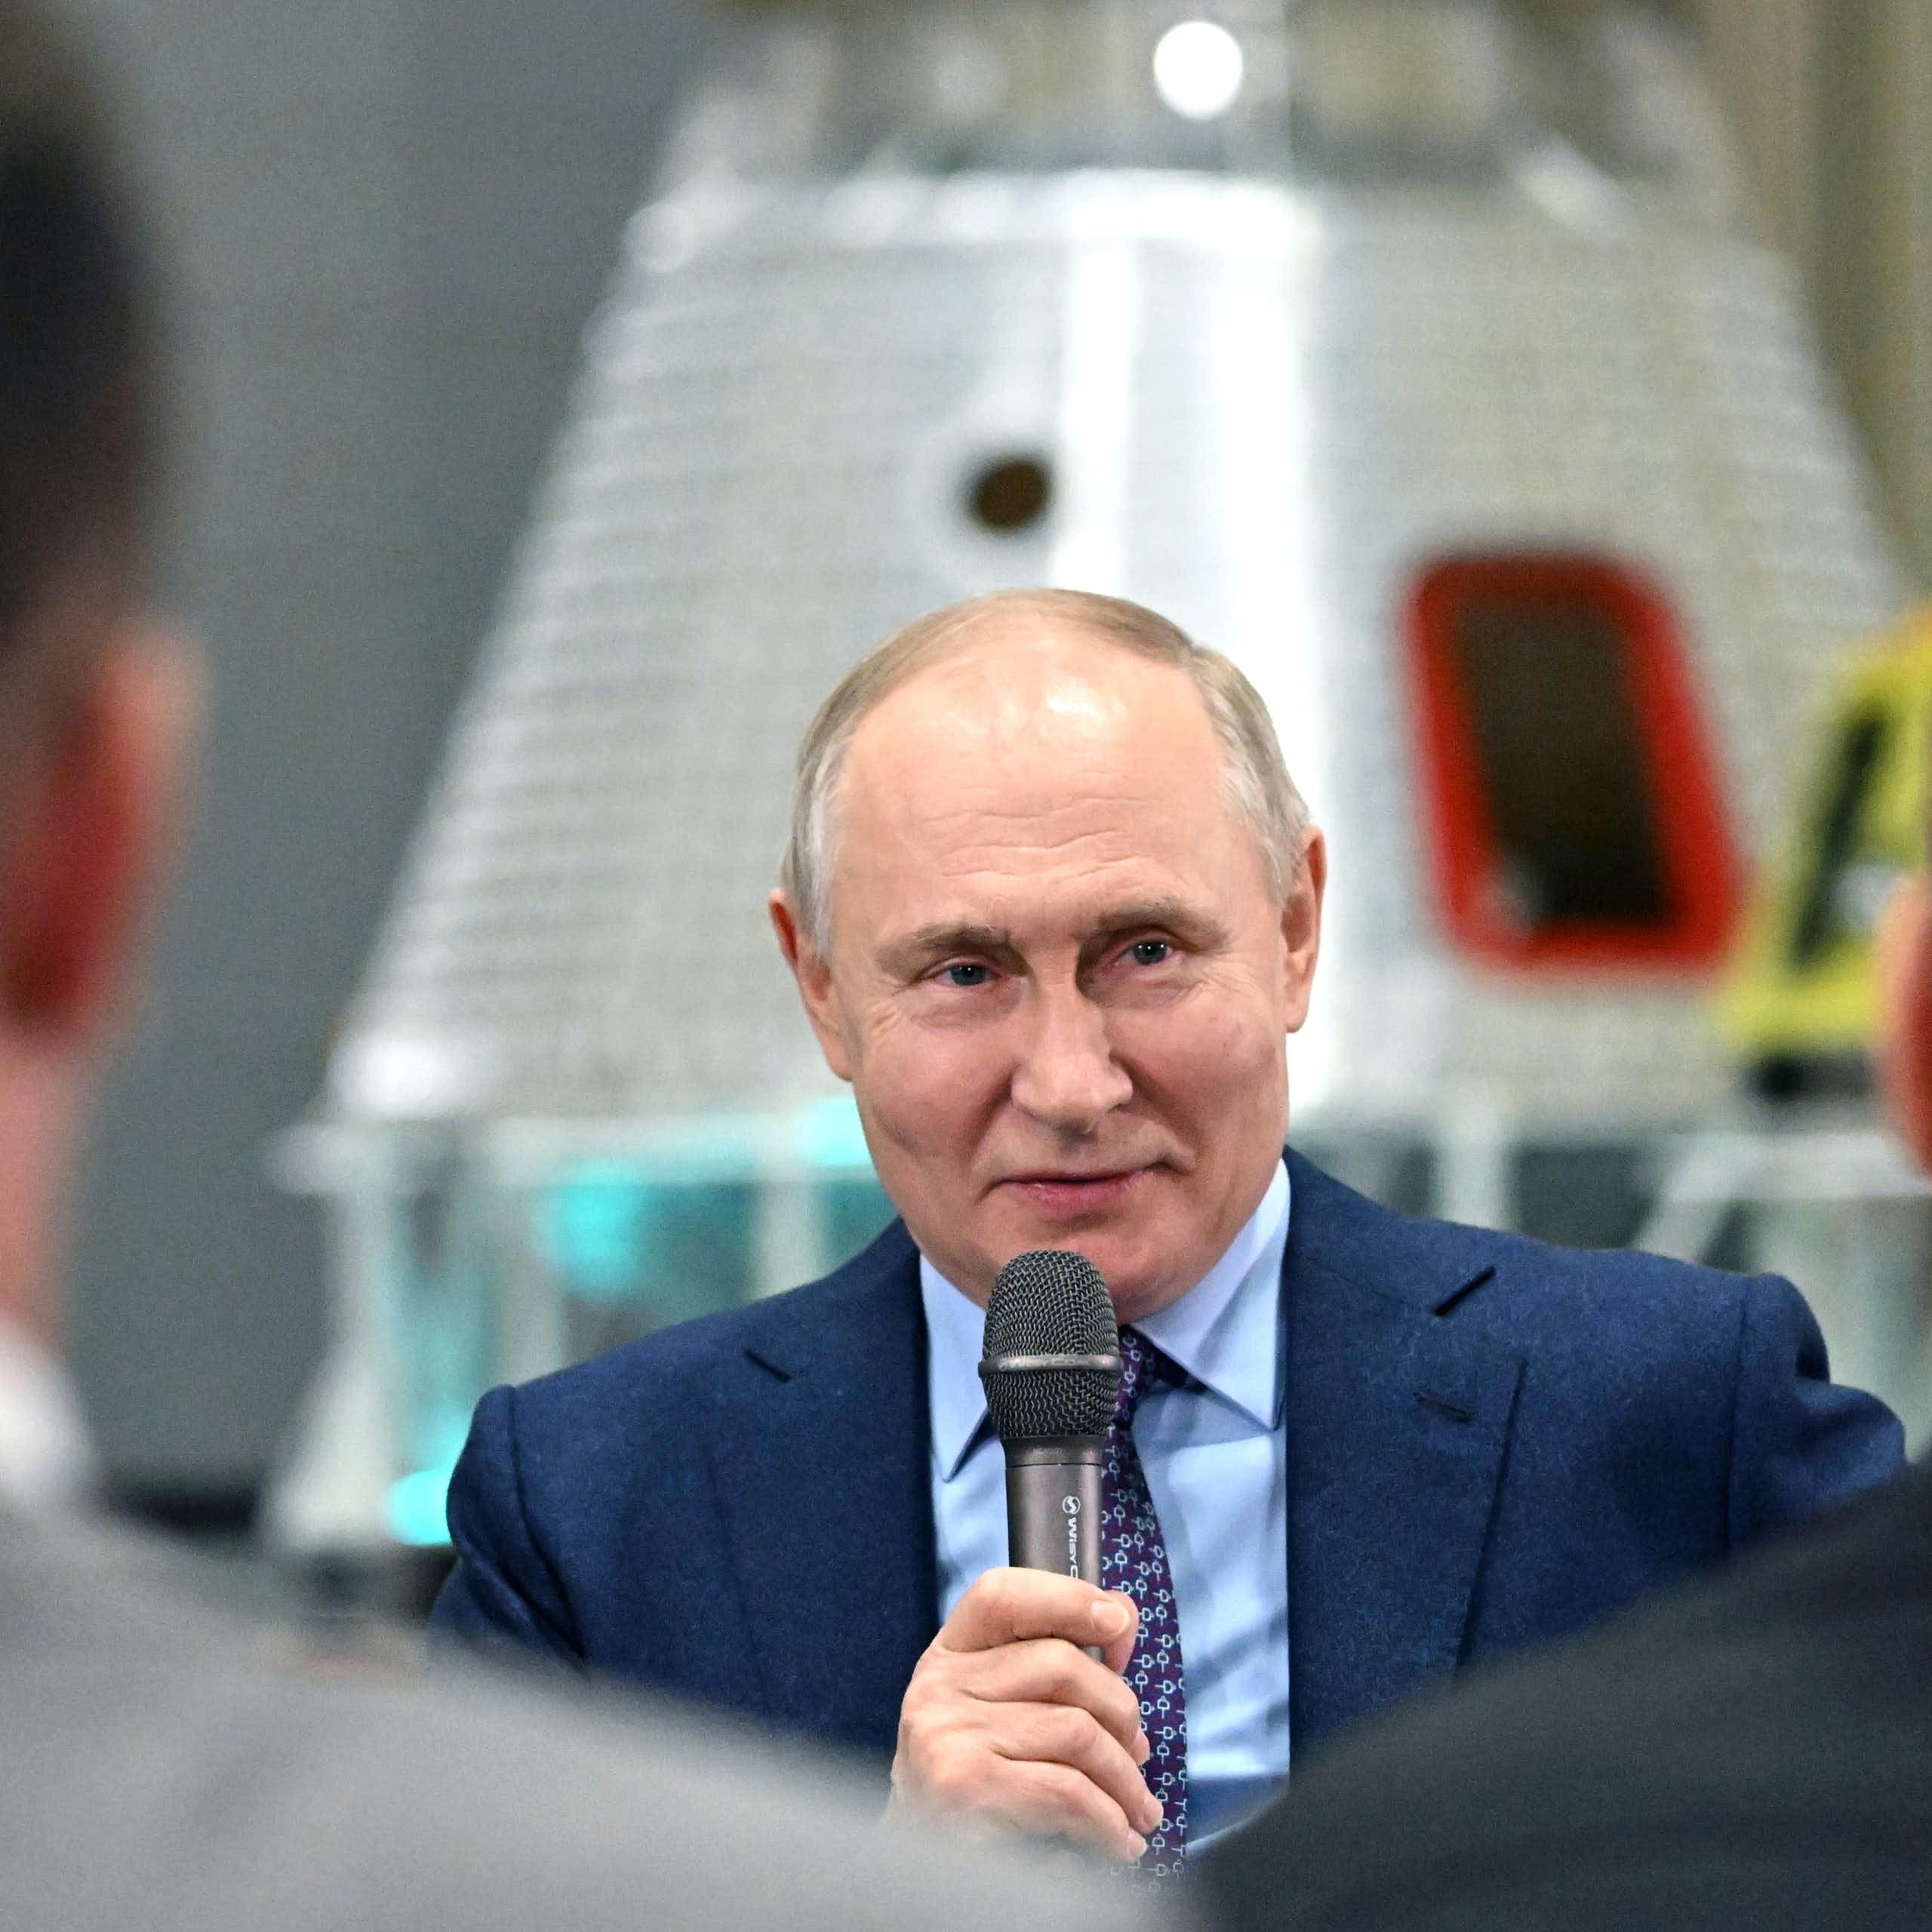 Is Russia looking to put nukes in space? Doing so would undermine global stability and ignite an anti-satellite arms race